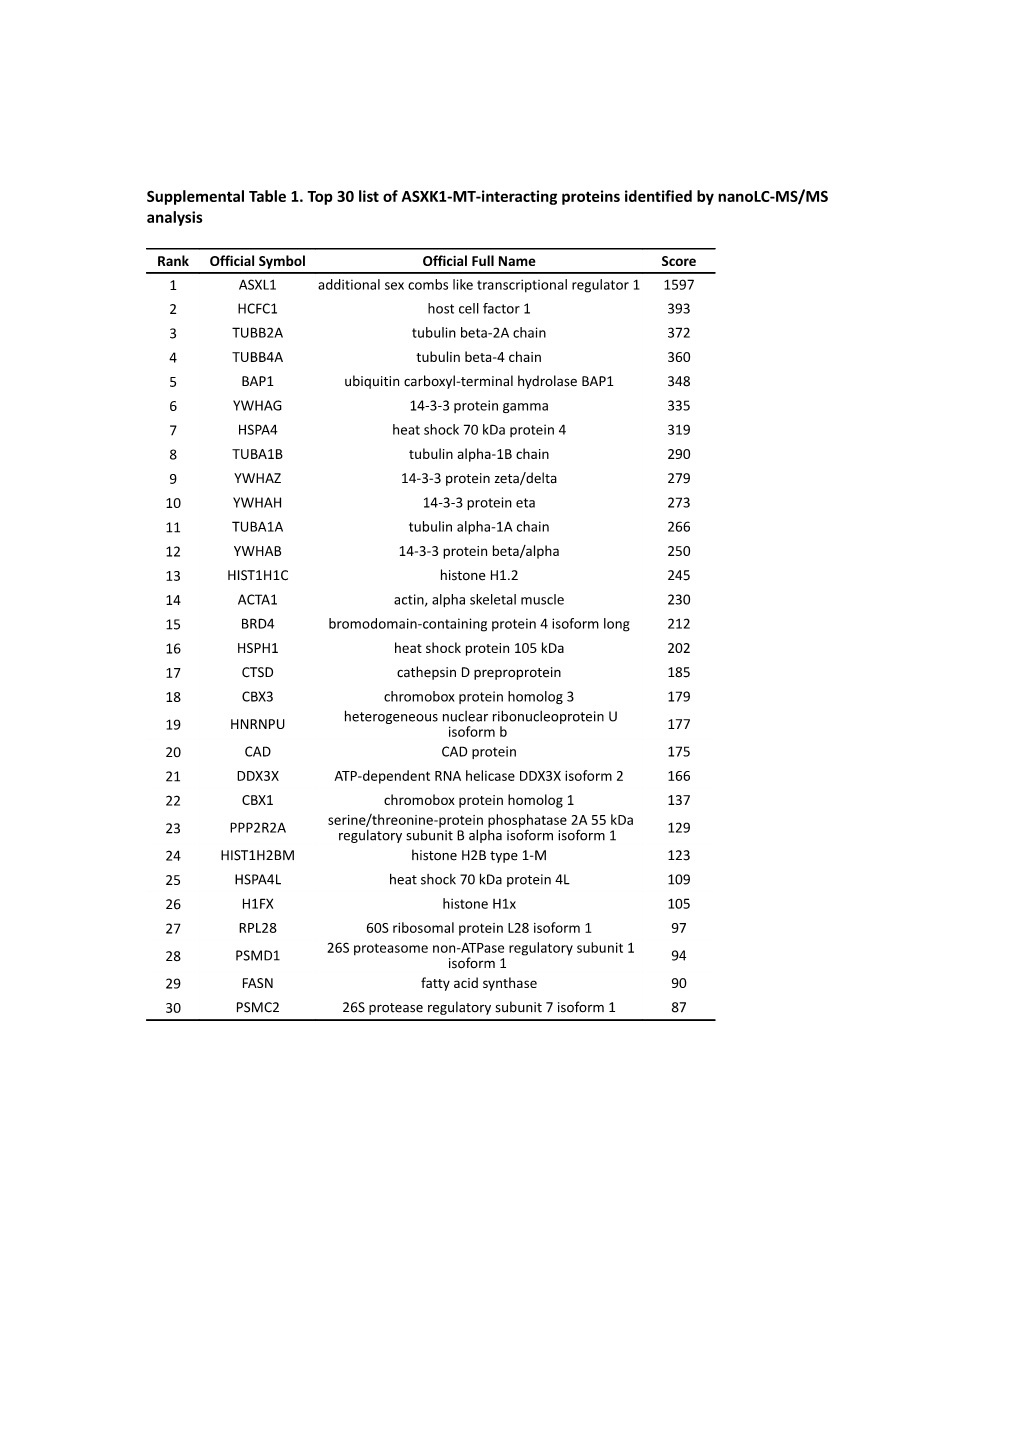 Supplemental Table 1. Top 30 List of ASXK1-MT-Interacting Proteins Identified by Nanolc-MS/MS